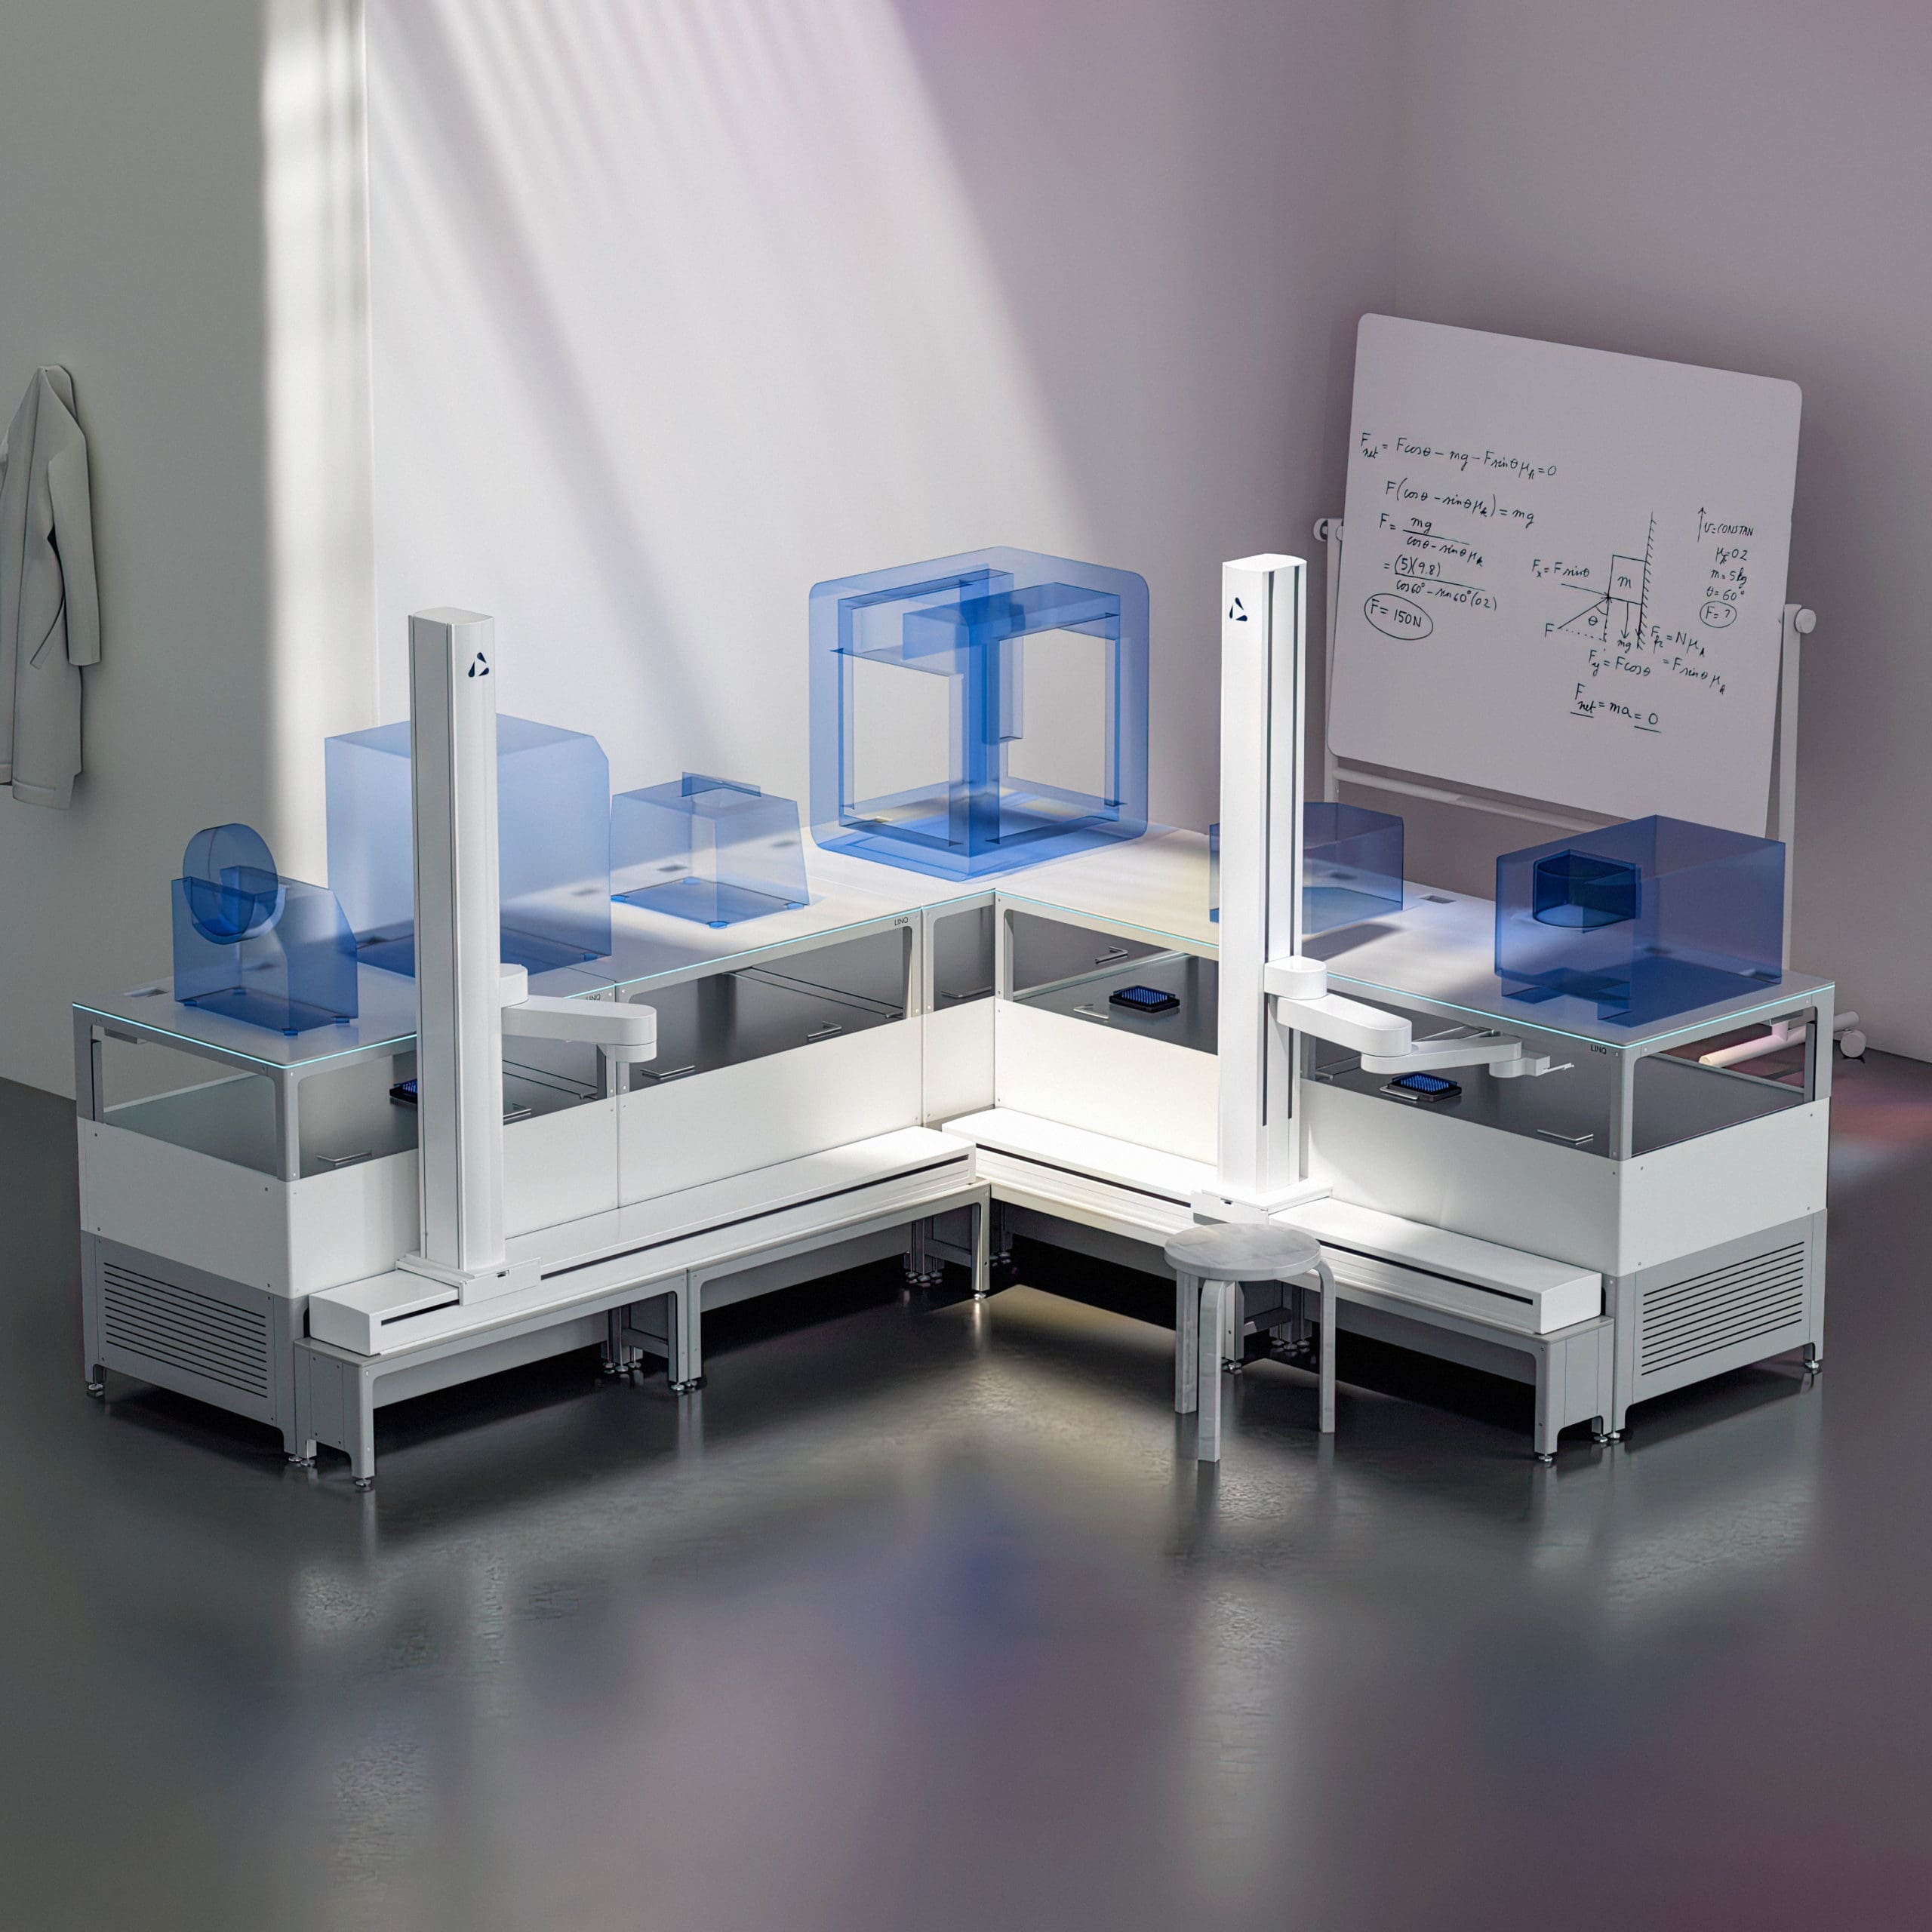 A render of 5 Automata LINQ benches in a corner L-shape configuration in a laboratory.